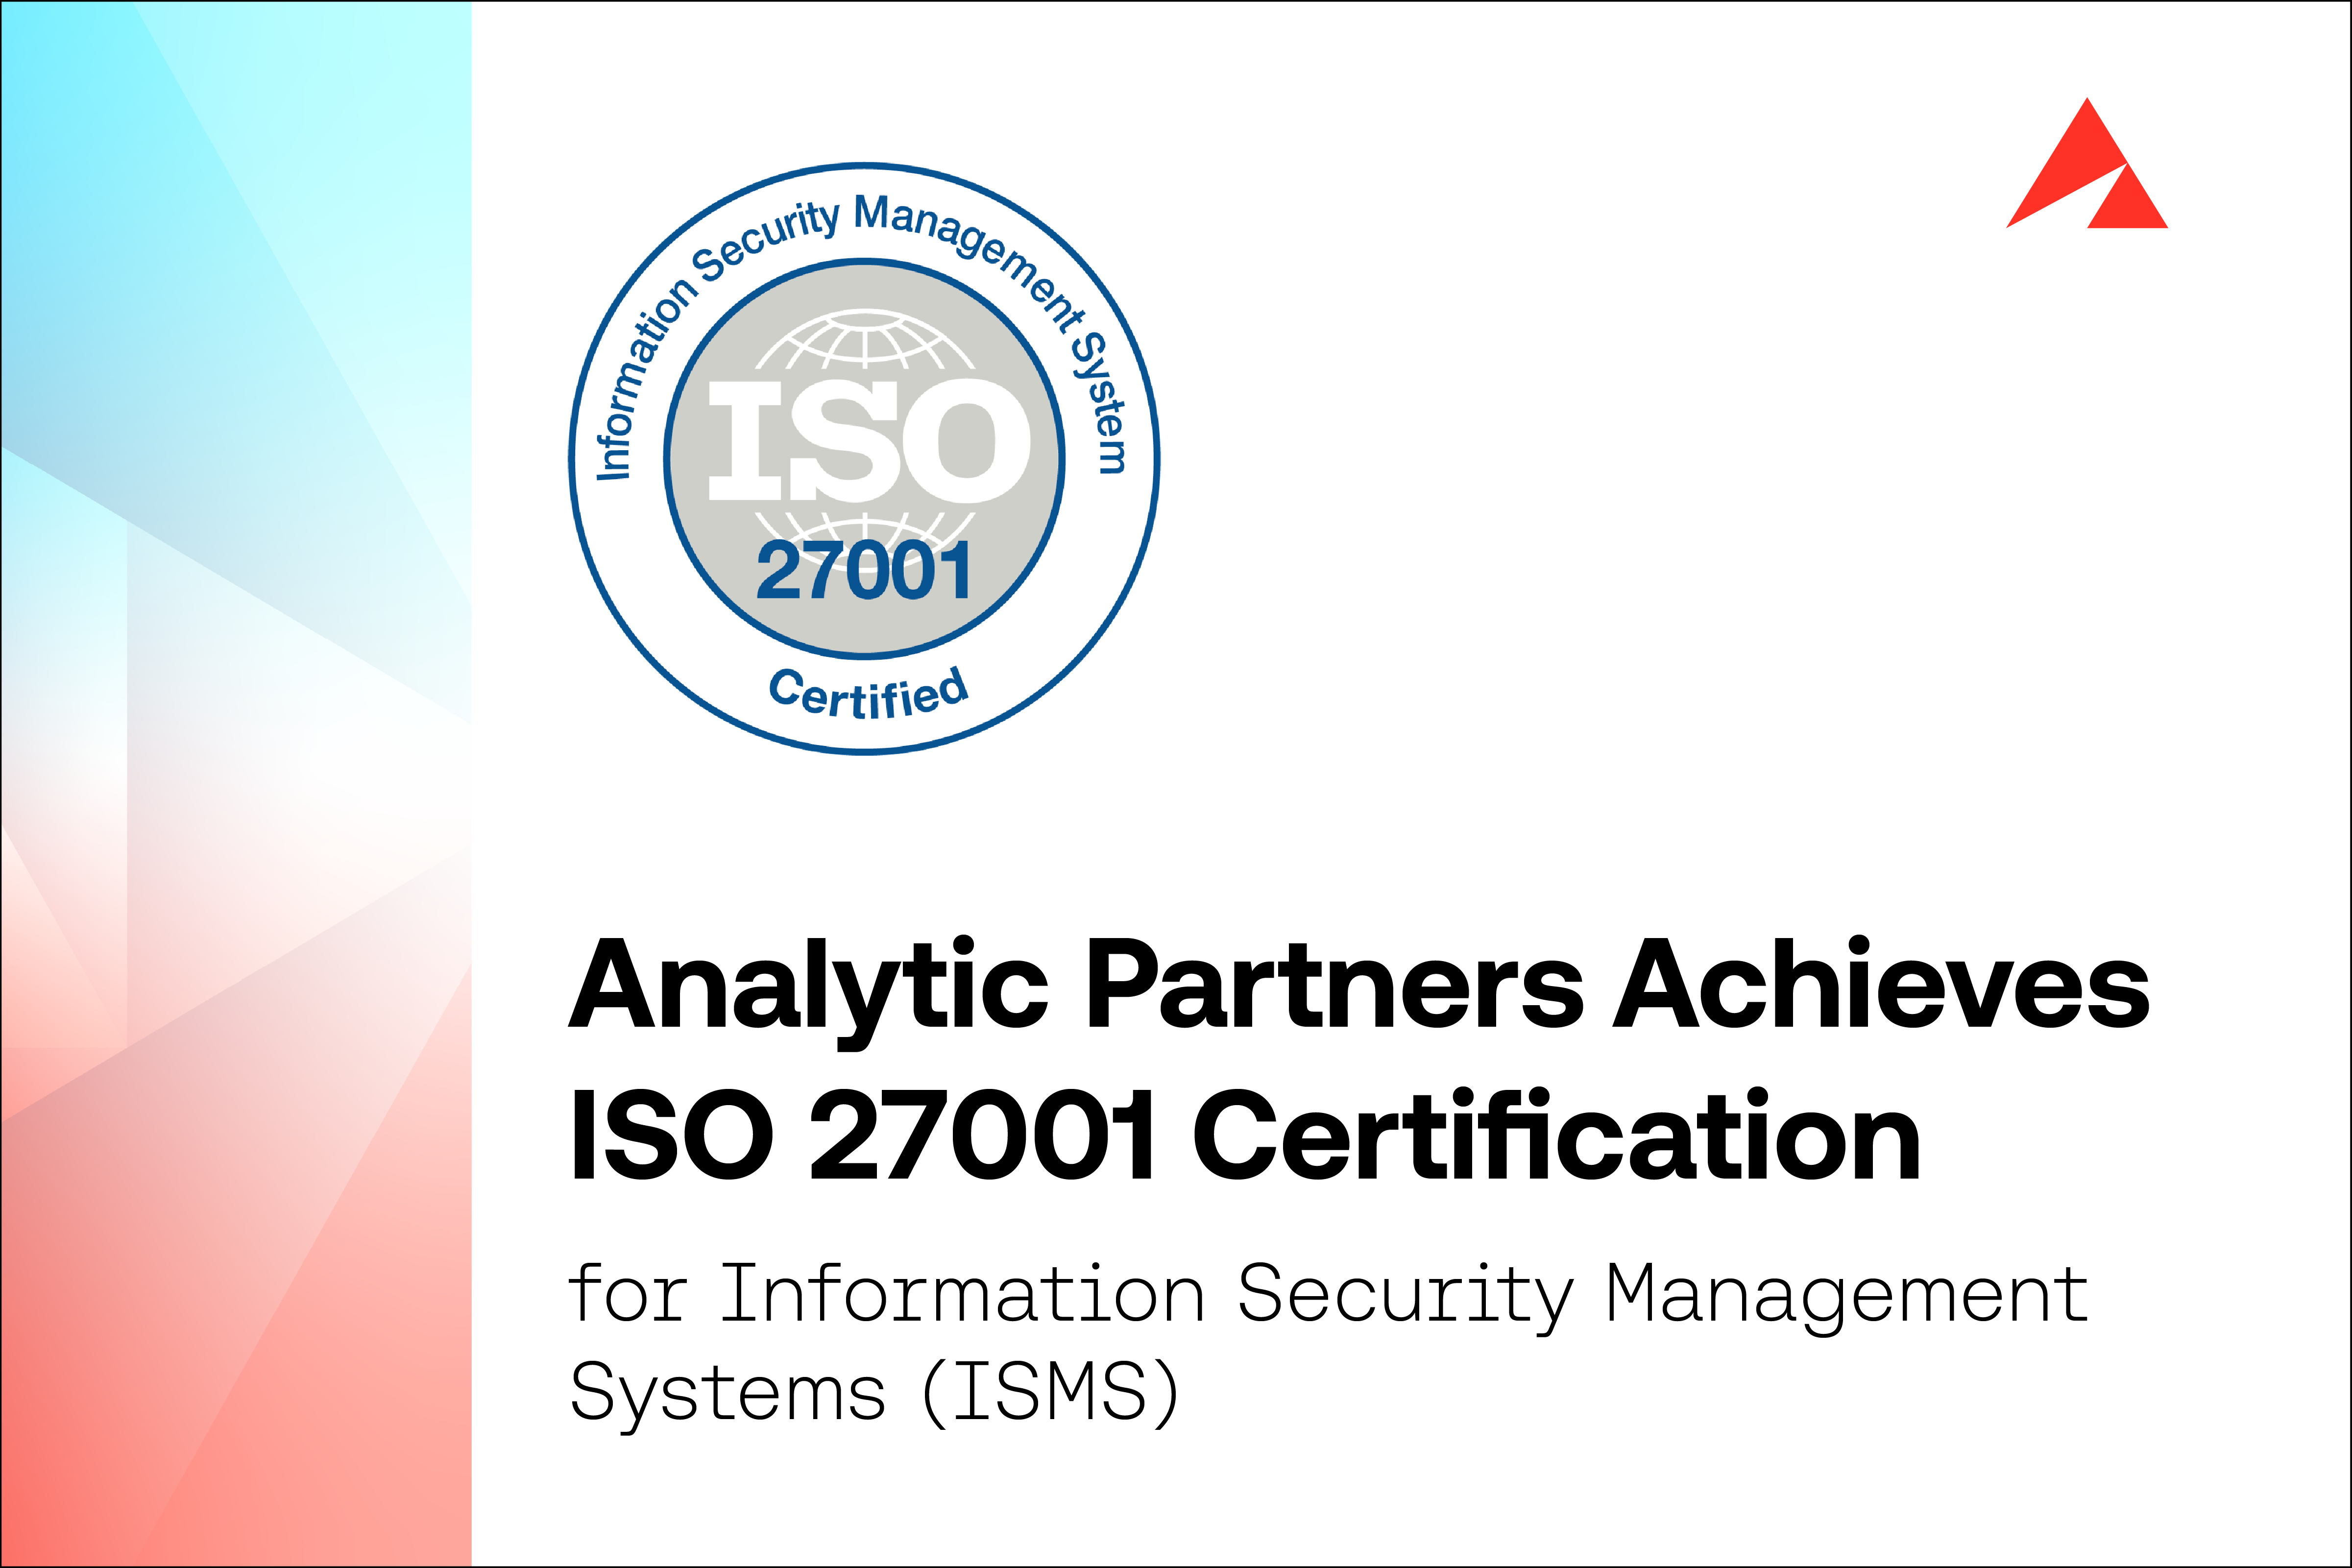 Analytic Partners Achieves ISO 27001